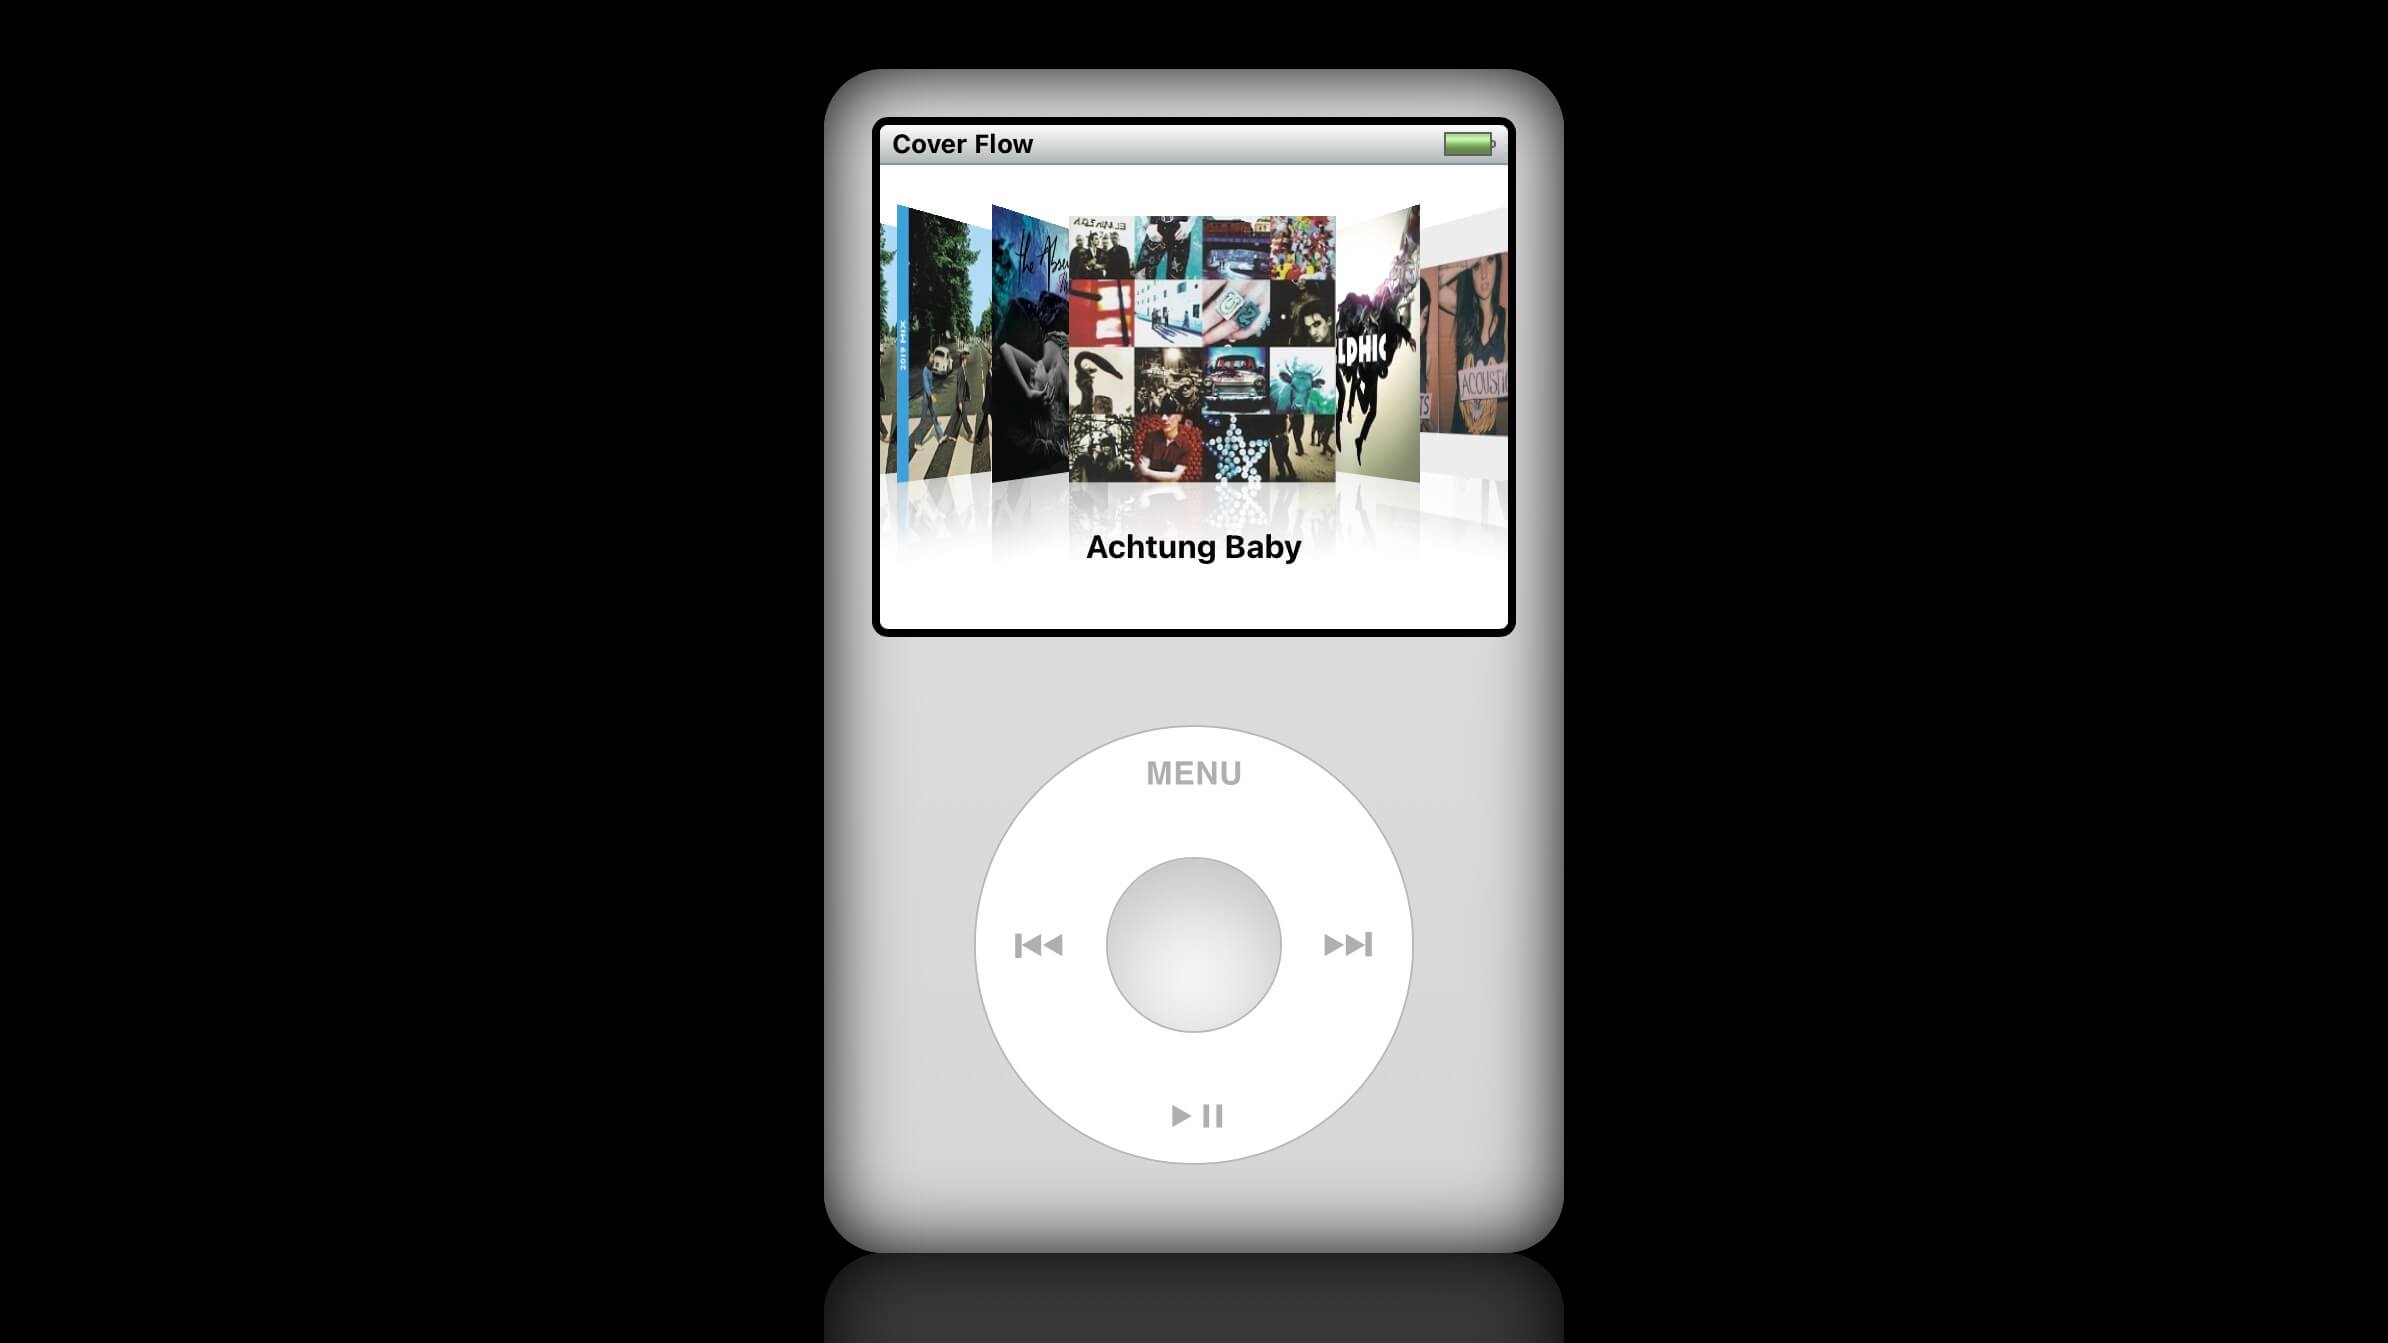 Image of a silver iPod in cover-flow mode